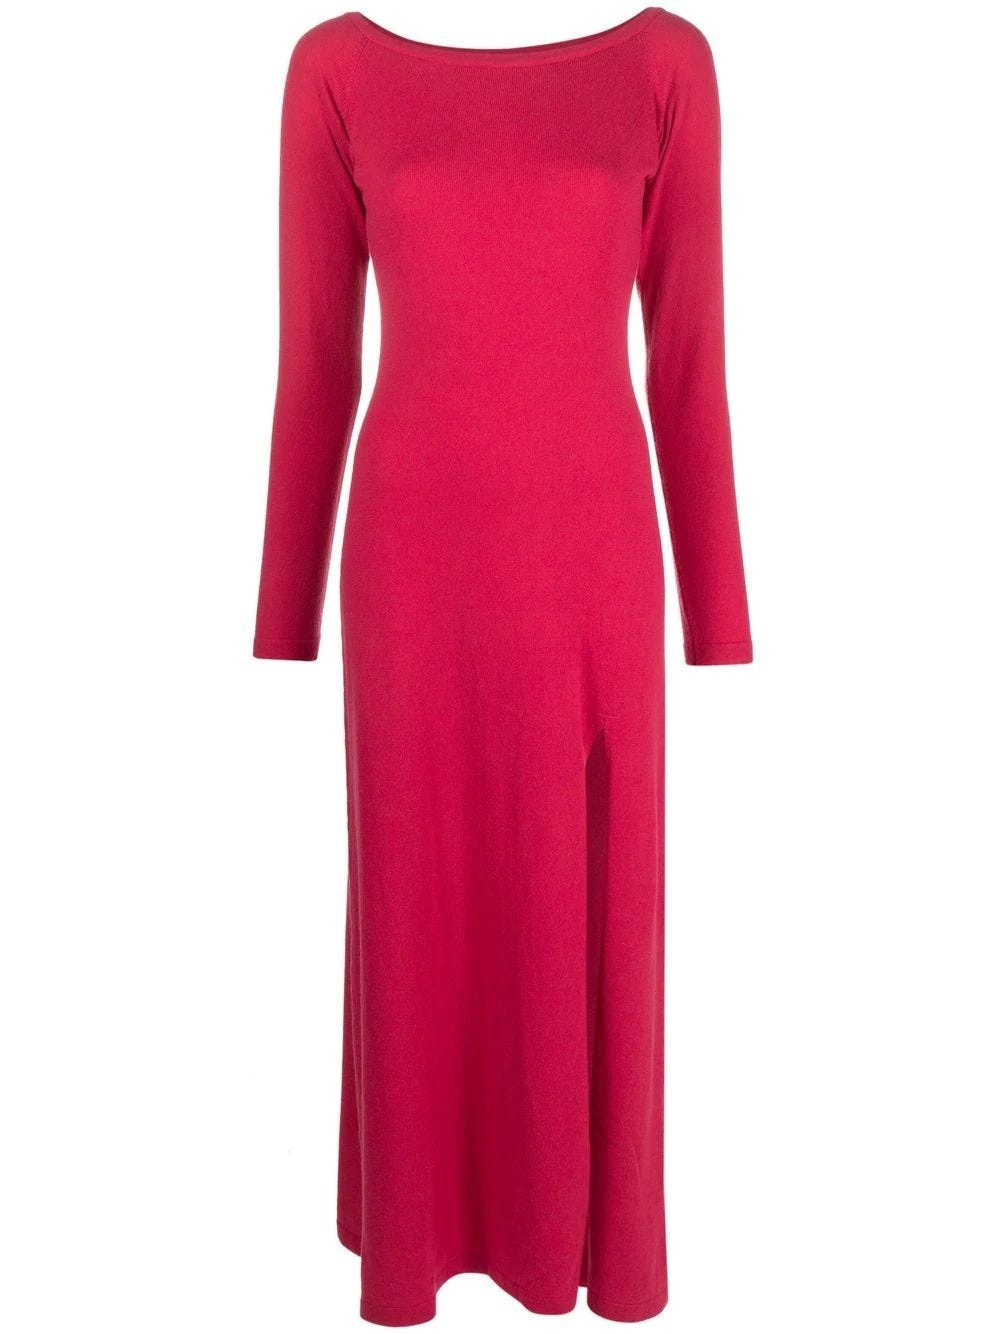 CANESSA FUCHSIA LONG DRESS IN CREW-NECK KNIT WITH SLIT